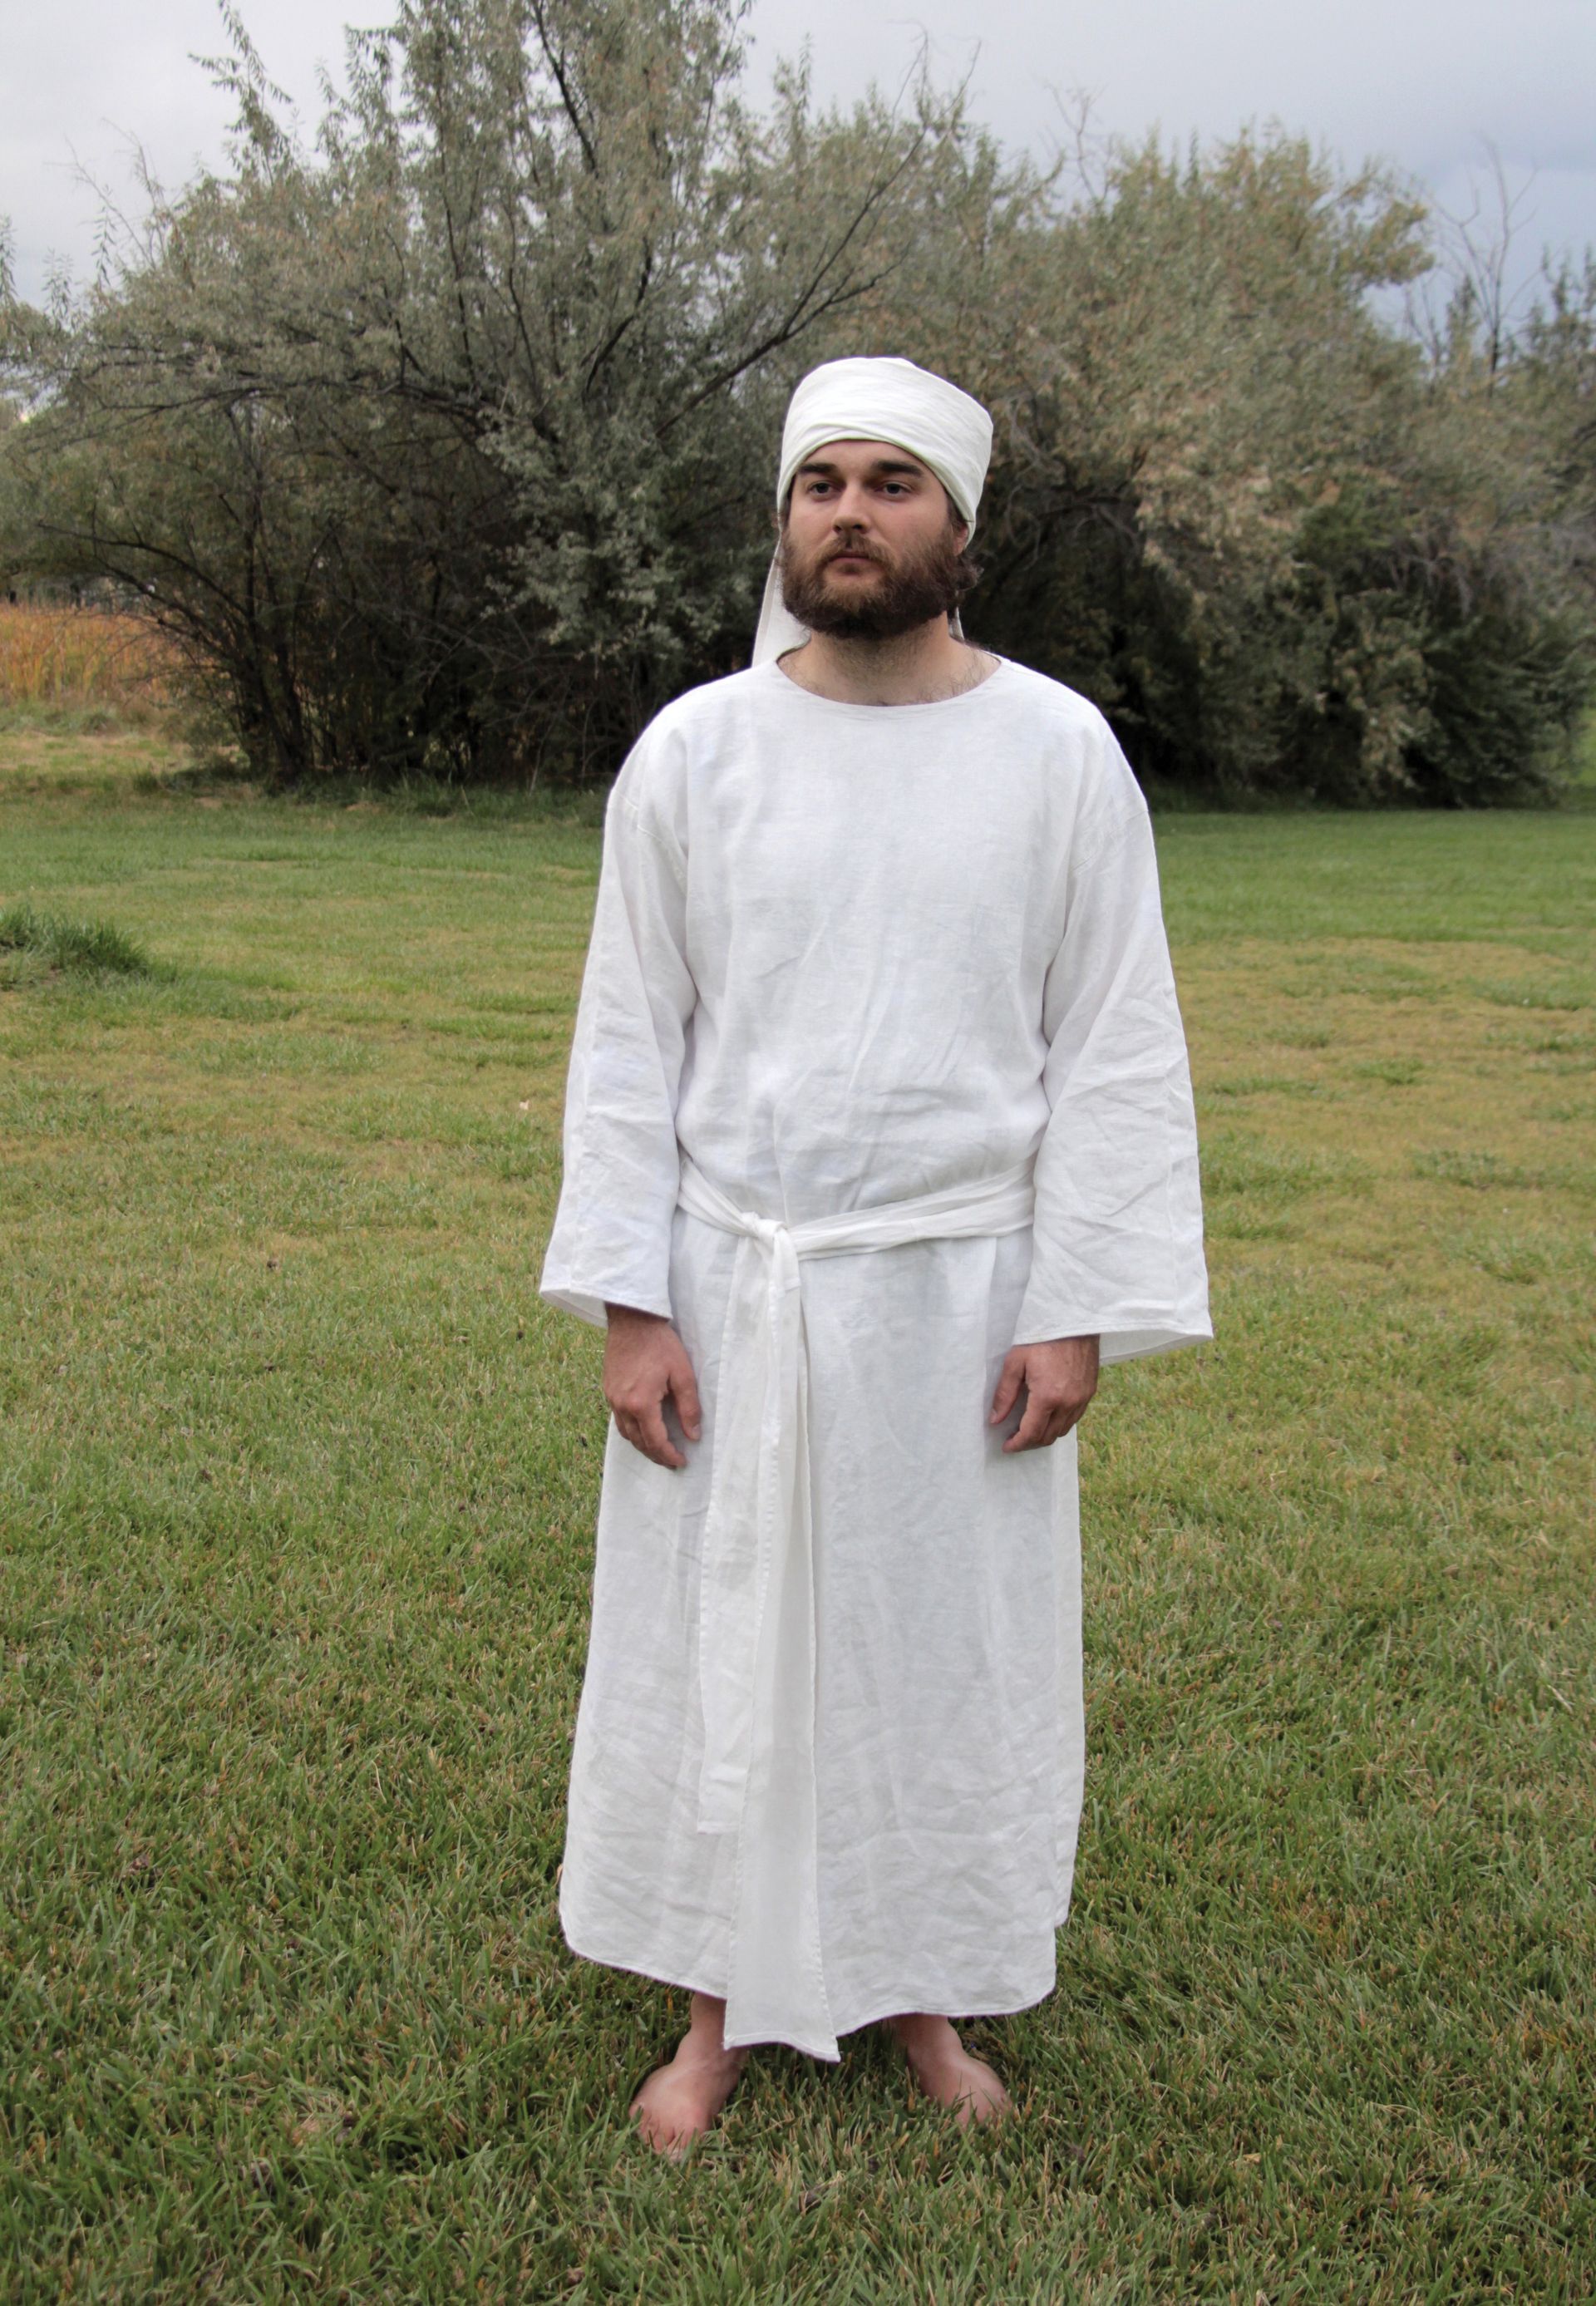 A model wearing the clothing of an Old Testament priest, created by Israel Daniel Smith.